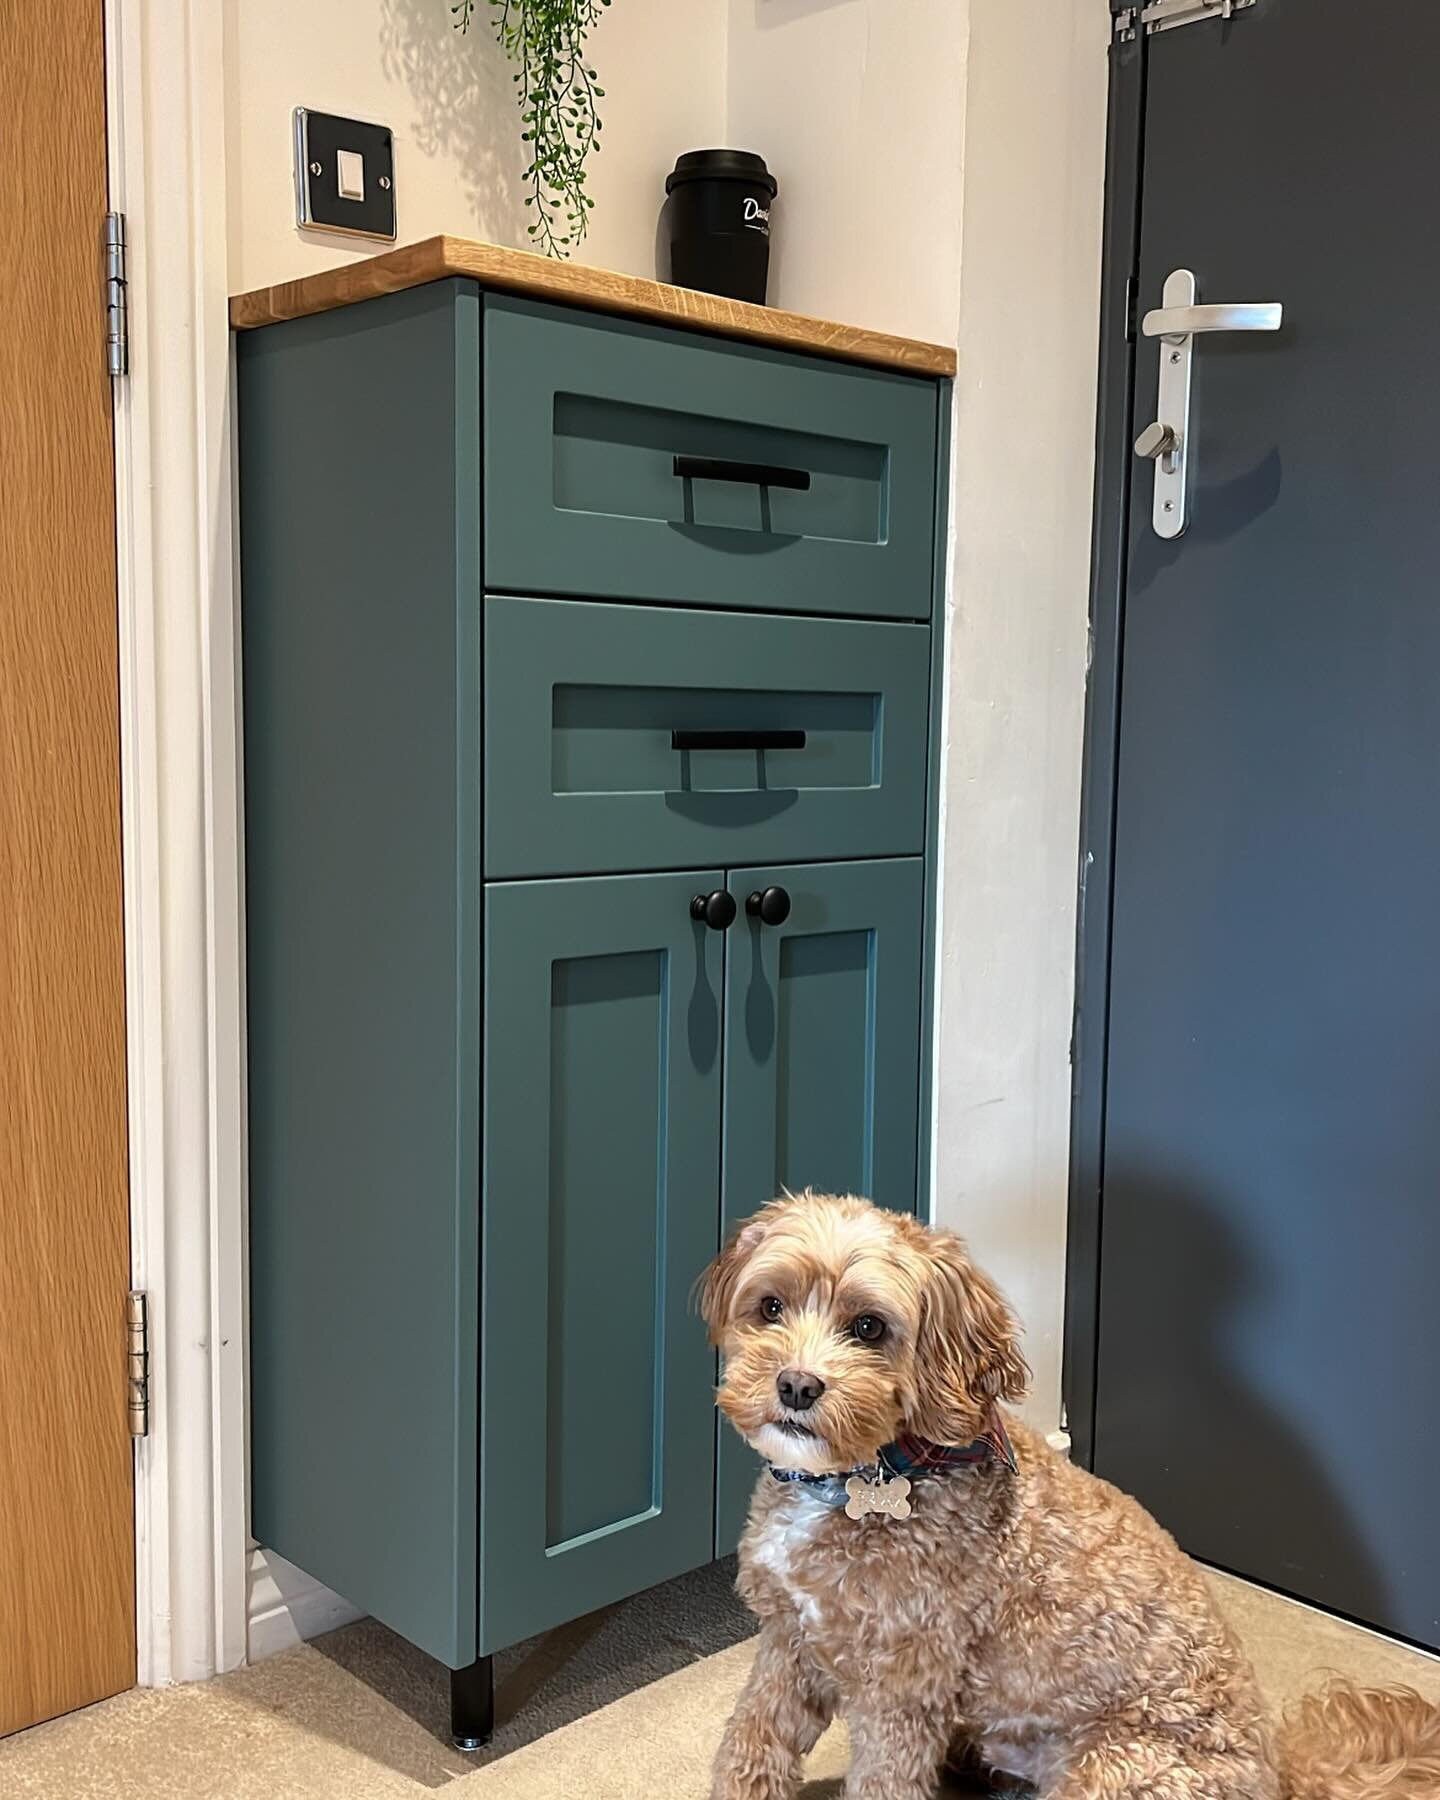 A few still shots of the last project completed in 2023. This cabinet was made specifically to store the belongings of the dog
.
#fittedfurniture #cabinetmaker #dogsofinstagram